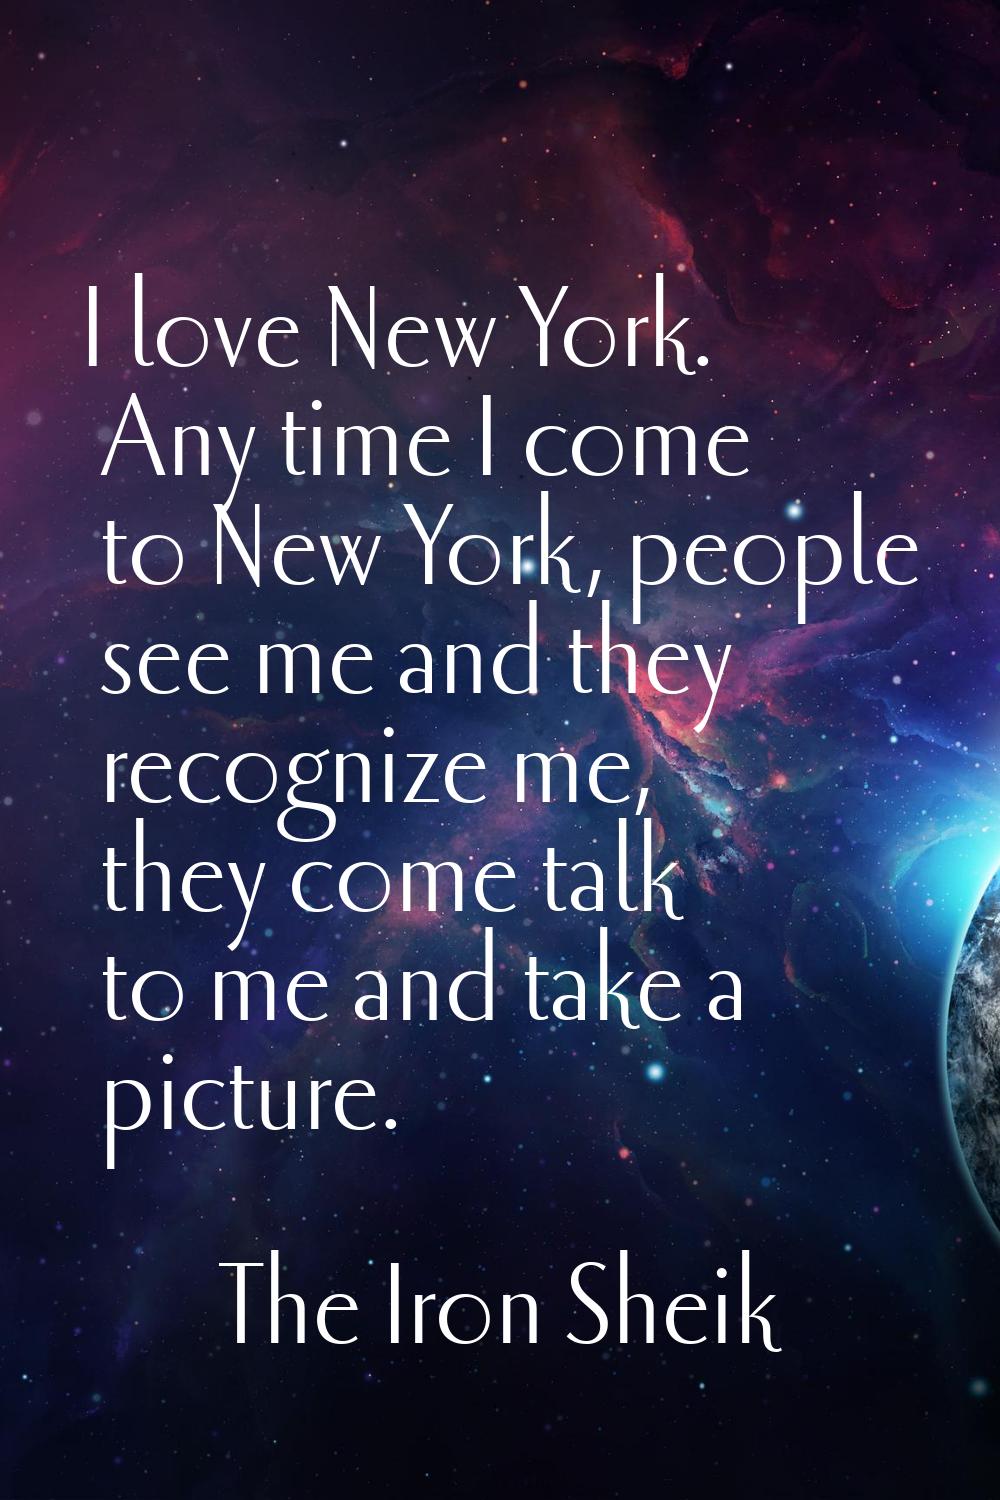 I love New York. Any time I come to New York, people see me and they recognize me, they come talk t